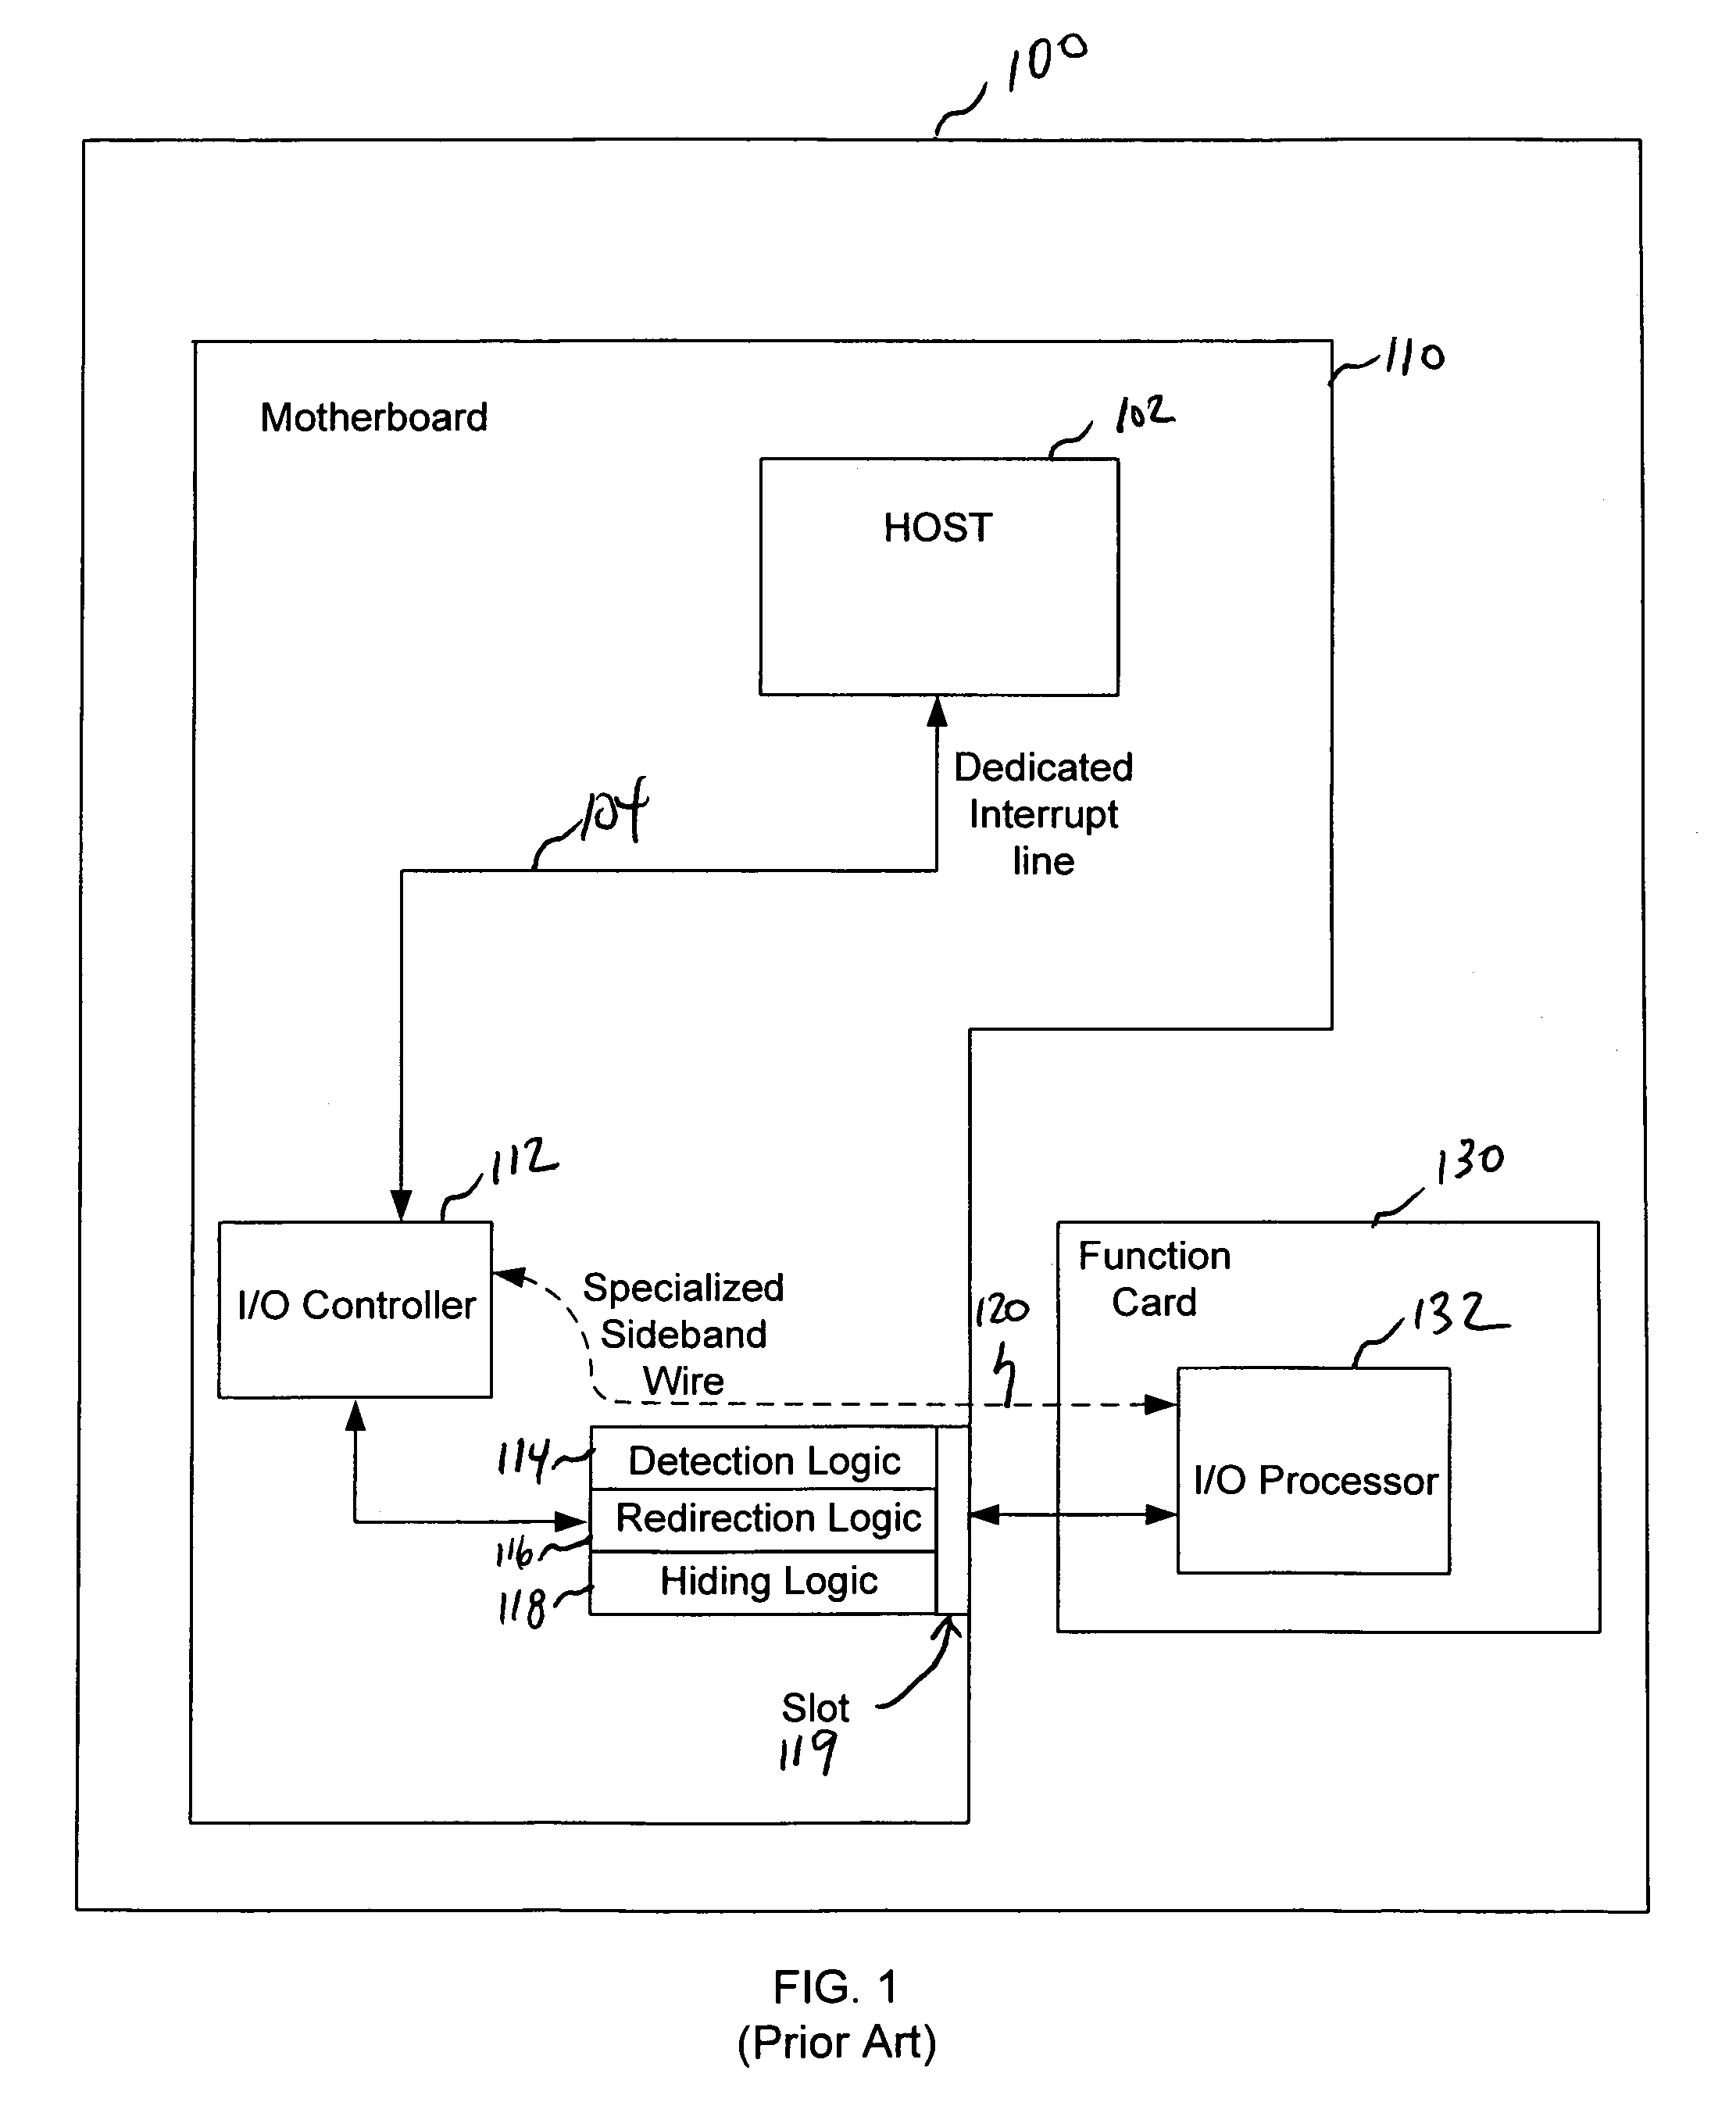 Interrupt steering in computing devices to effectuate peer-to-peer communications between device controllers and coprocessors